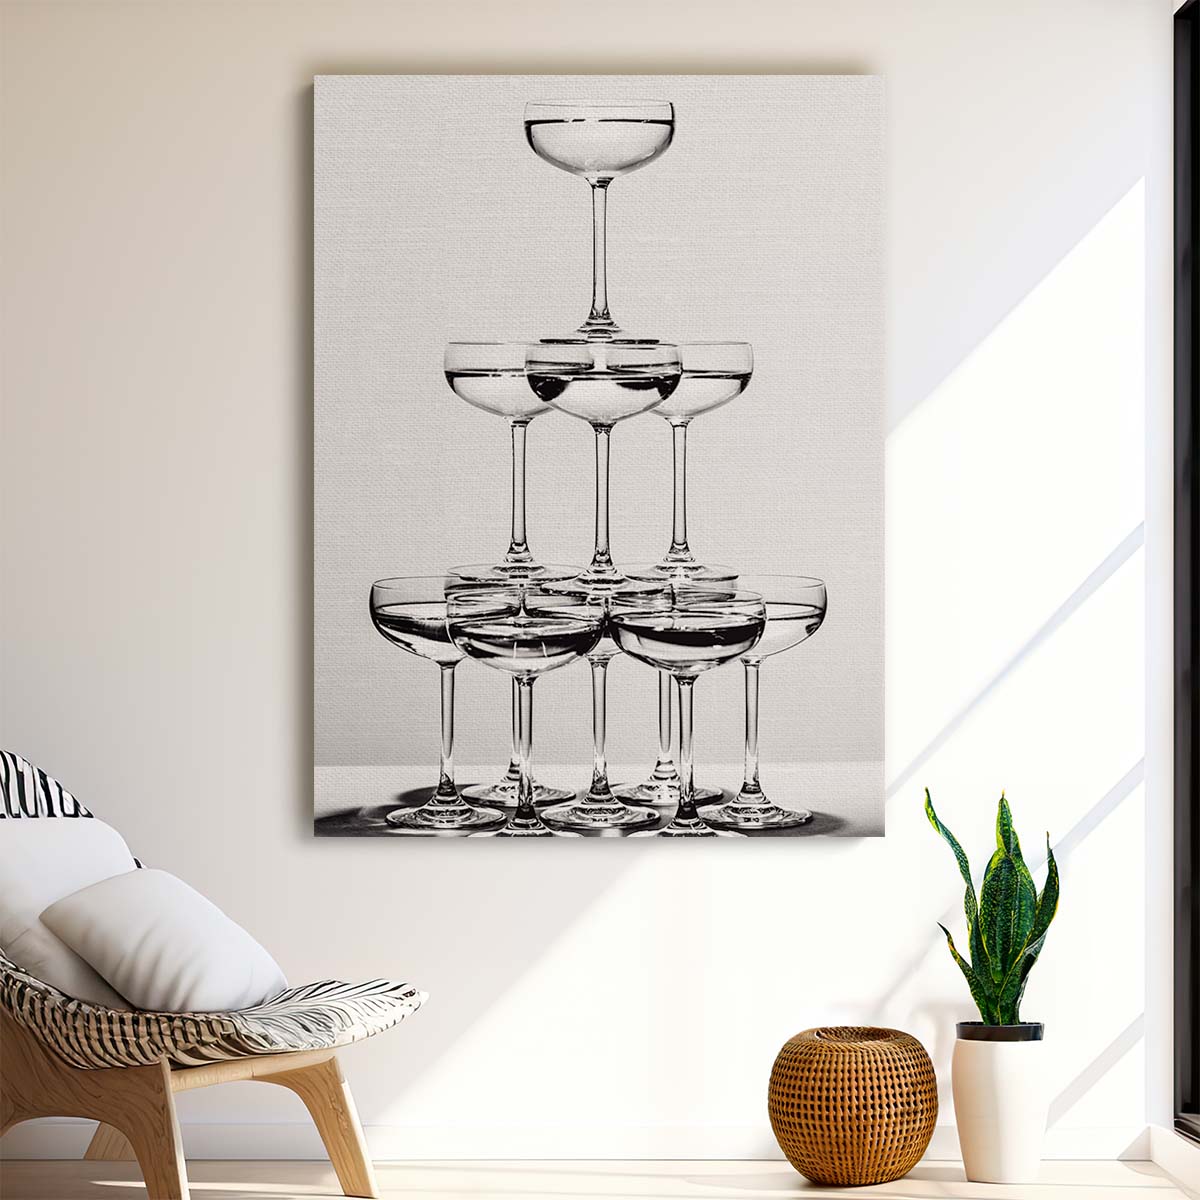 Monochrome Still Life Champagne Tower Photography for Bar Decor by Luxuriance Designs, made in USA